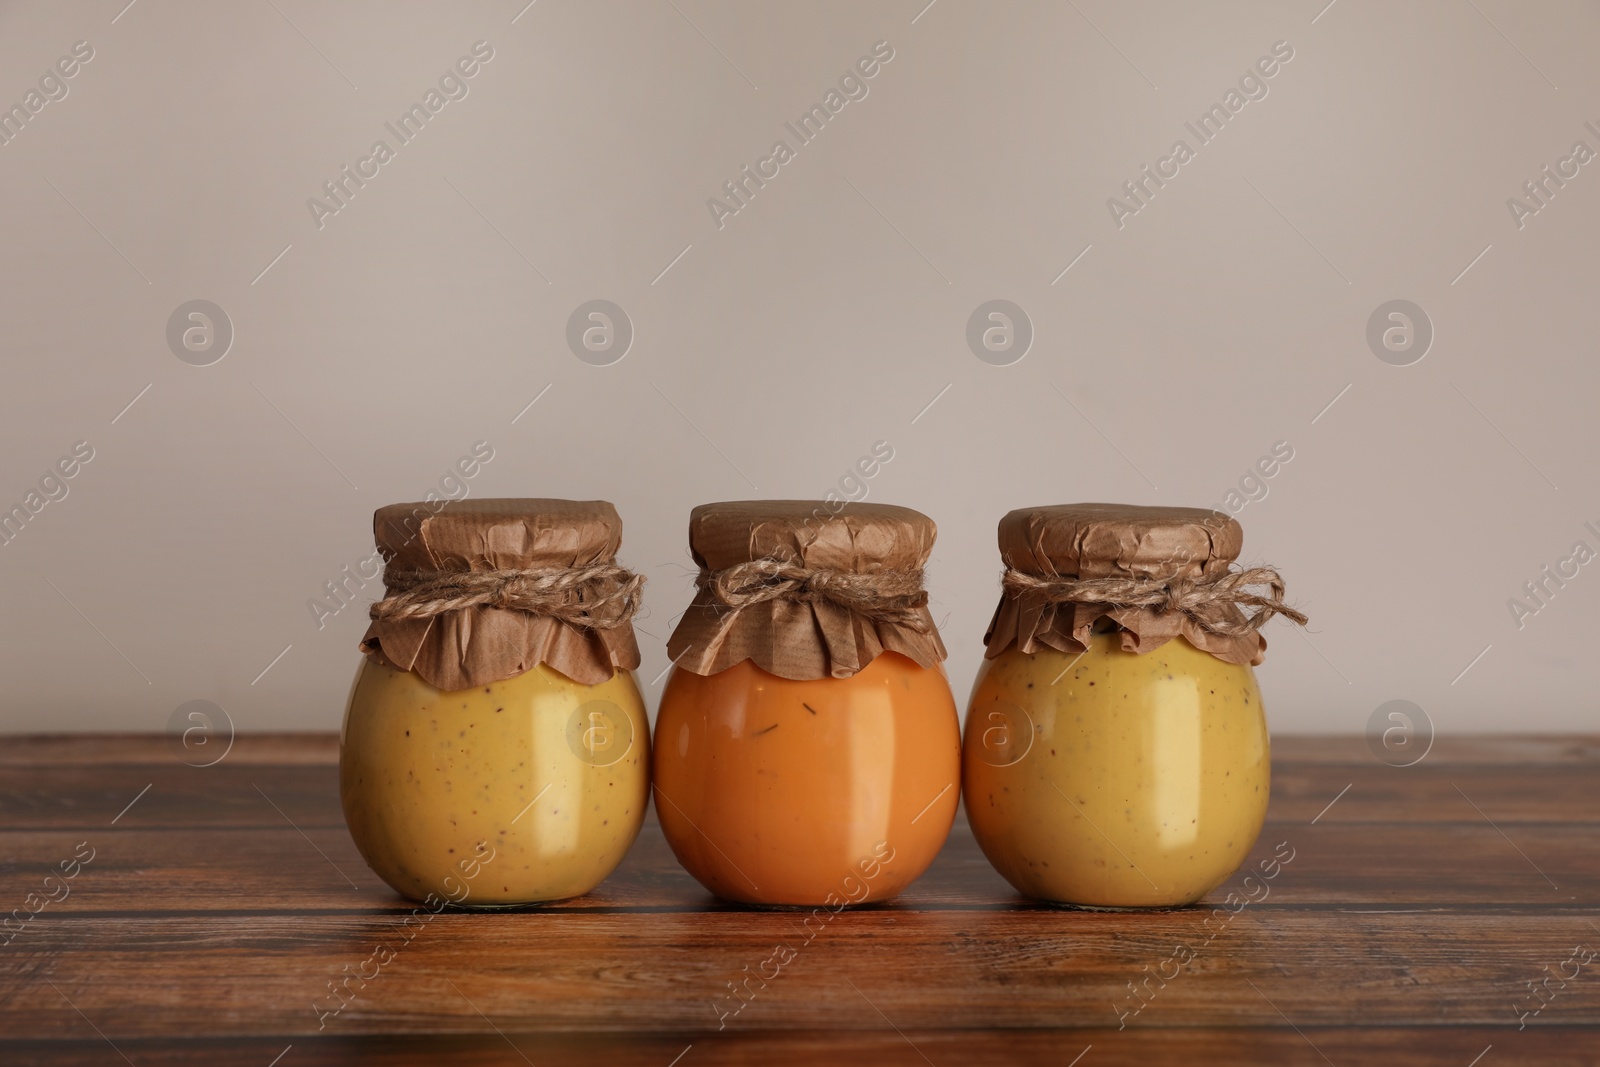 Photo of Jars with preserved fruit jams on wooden table